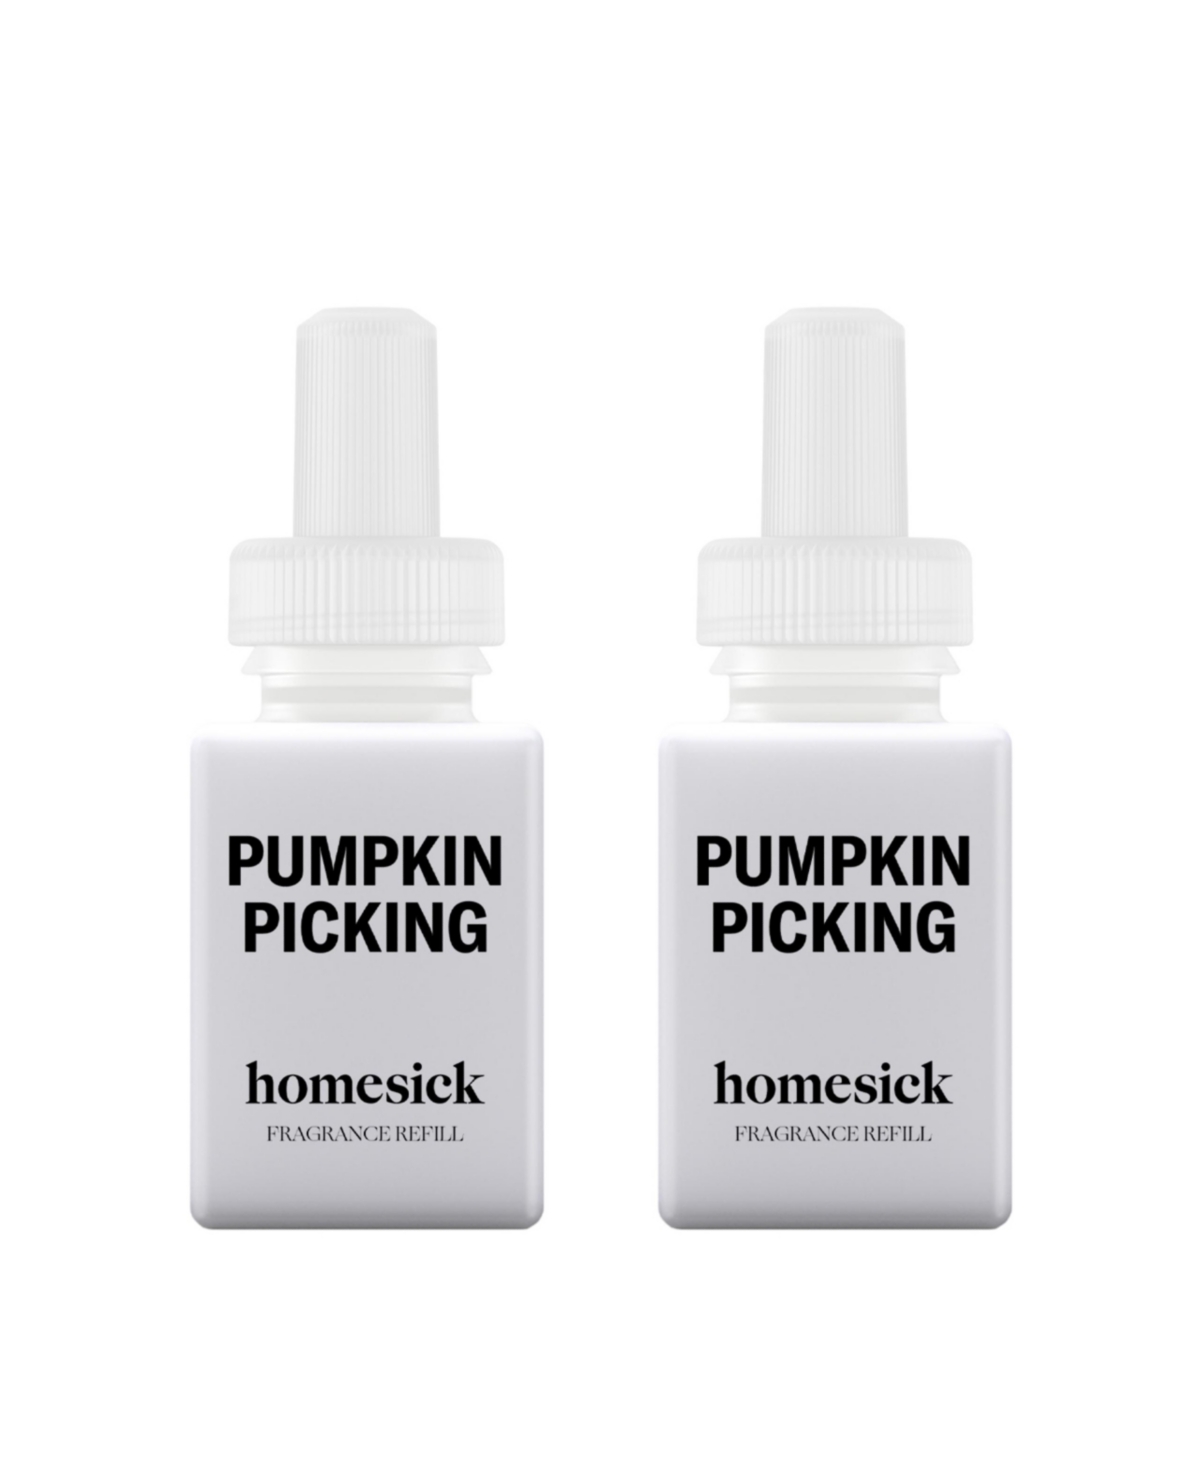 Homesick - Pumpkin Picking - Home Scent Refill - Smart Home Air Diffuser Fragrance - Up to 120-Hours of Luxury Fragrance per Refill - Clean & Saf